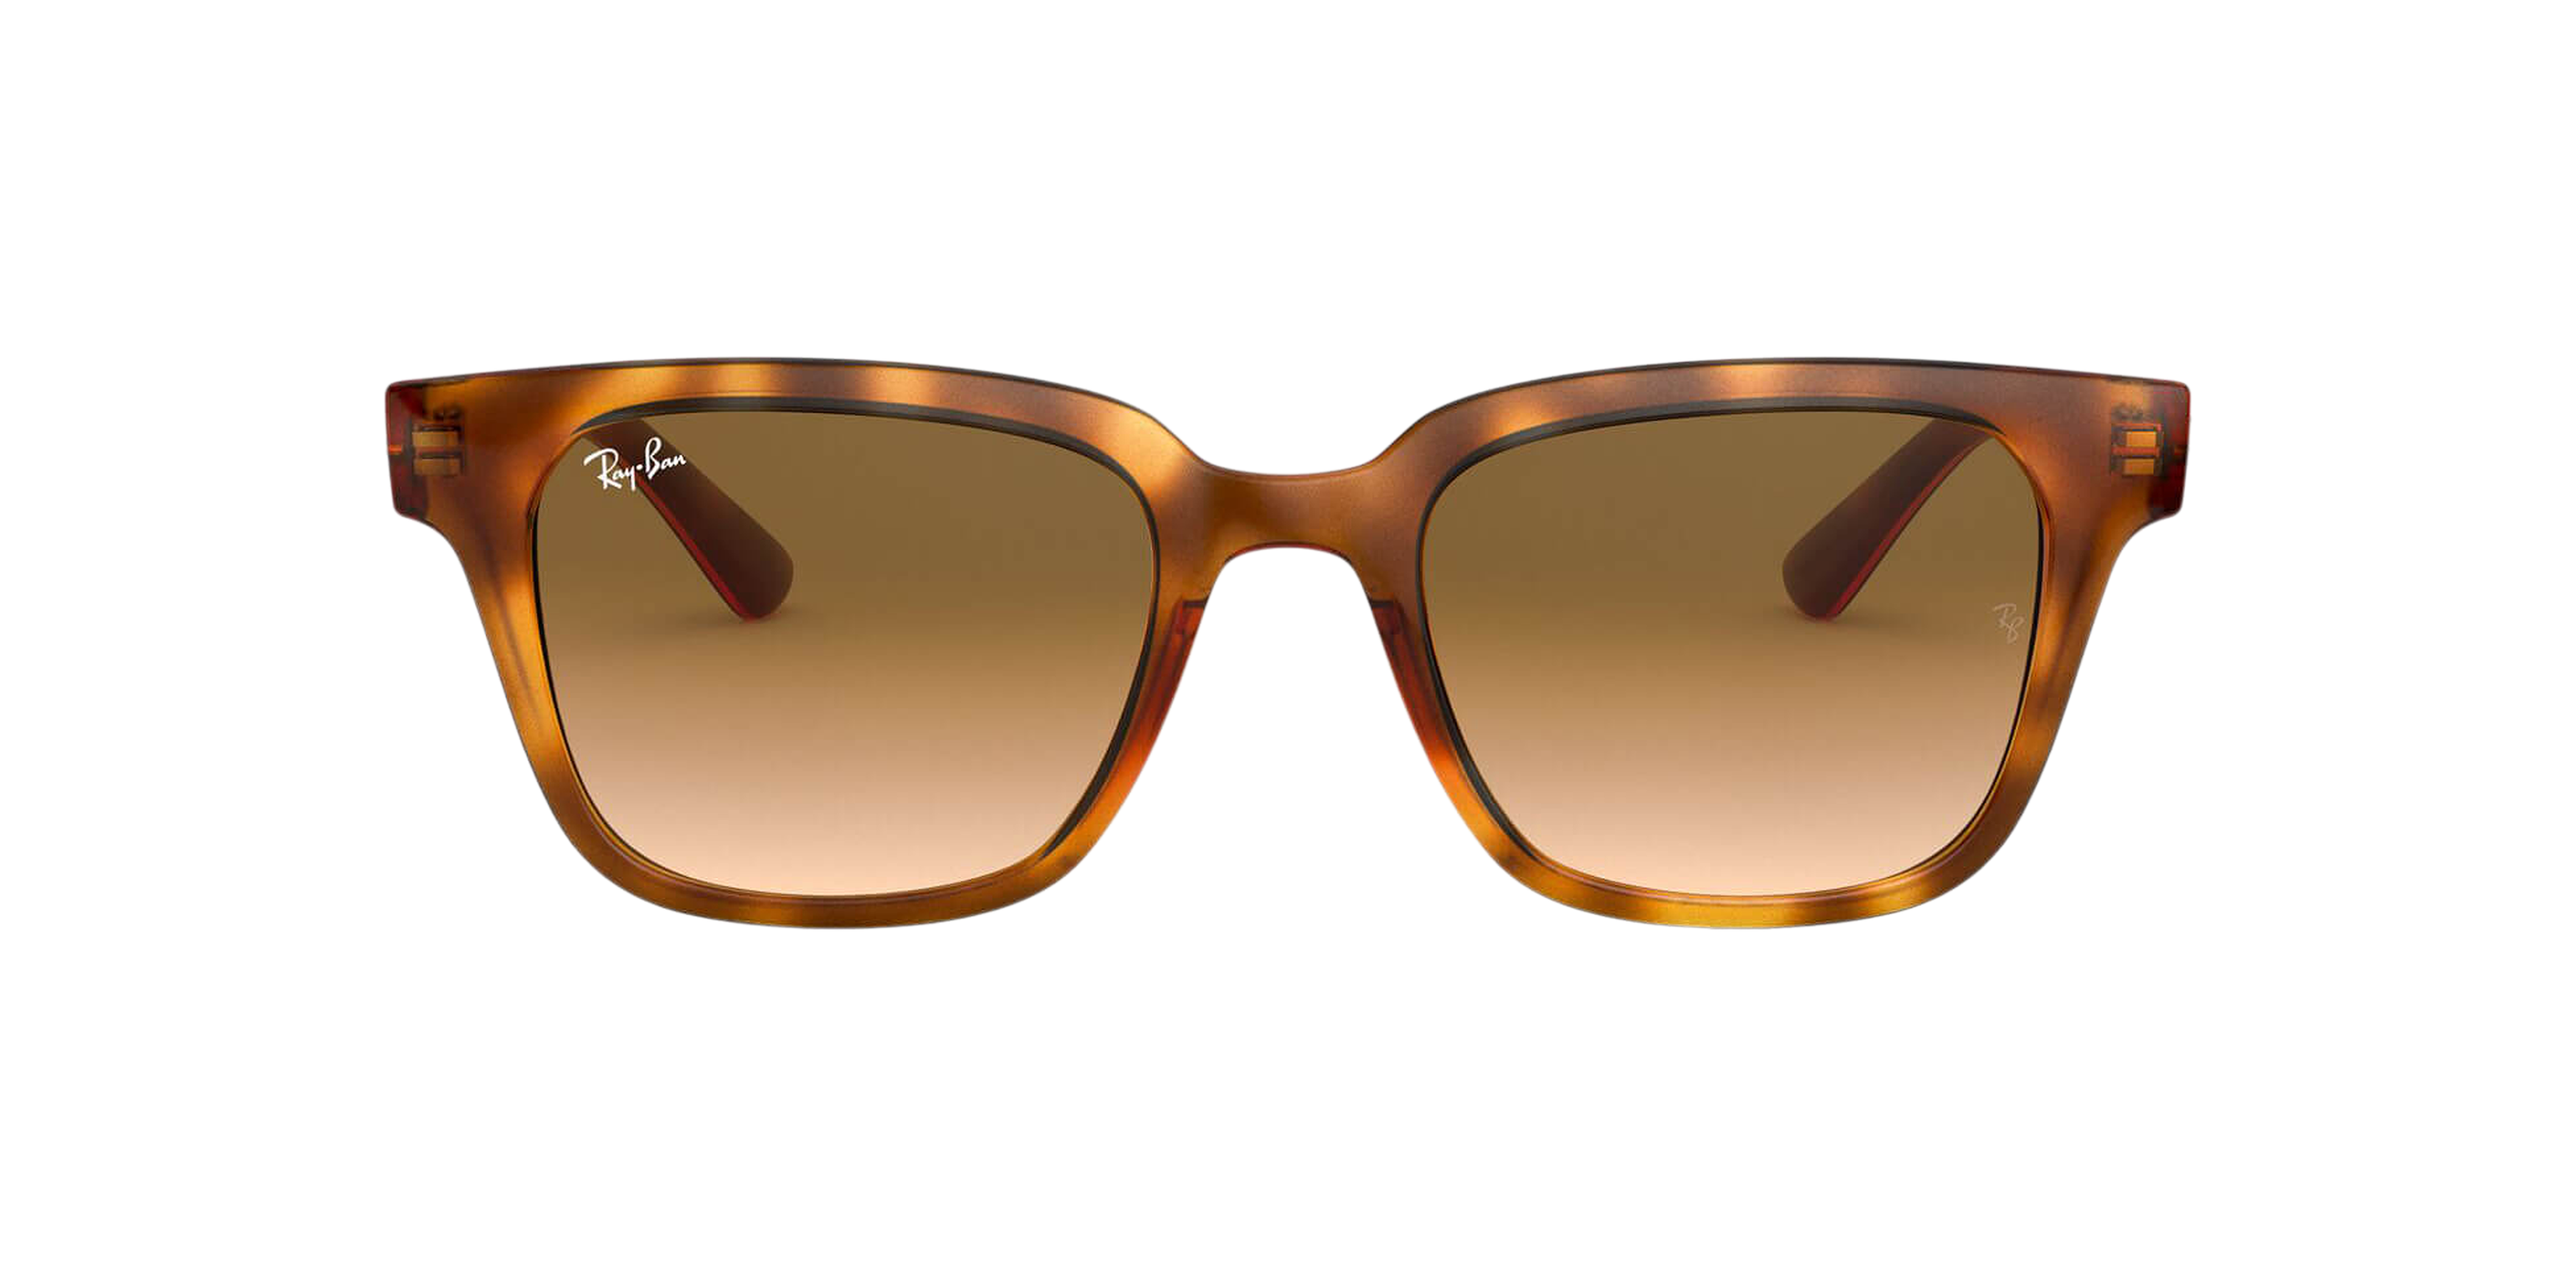 [products.image.front] Ray-Ban RB4323 647551